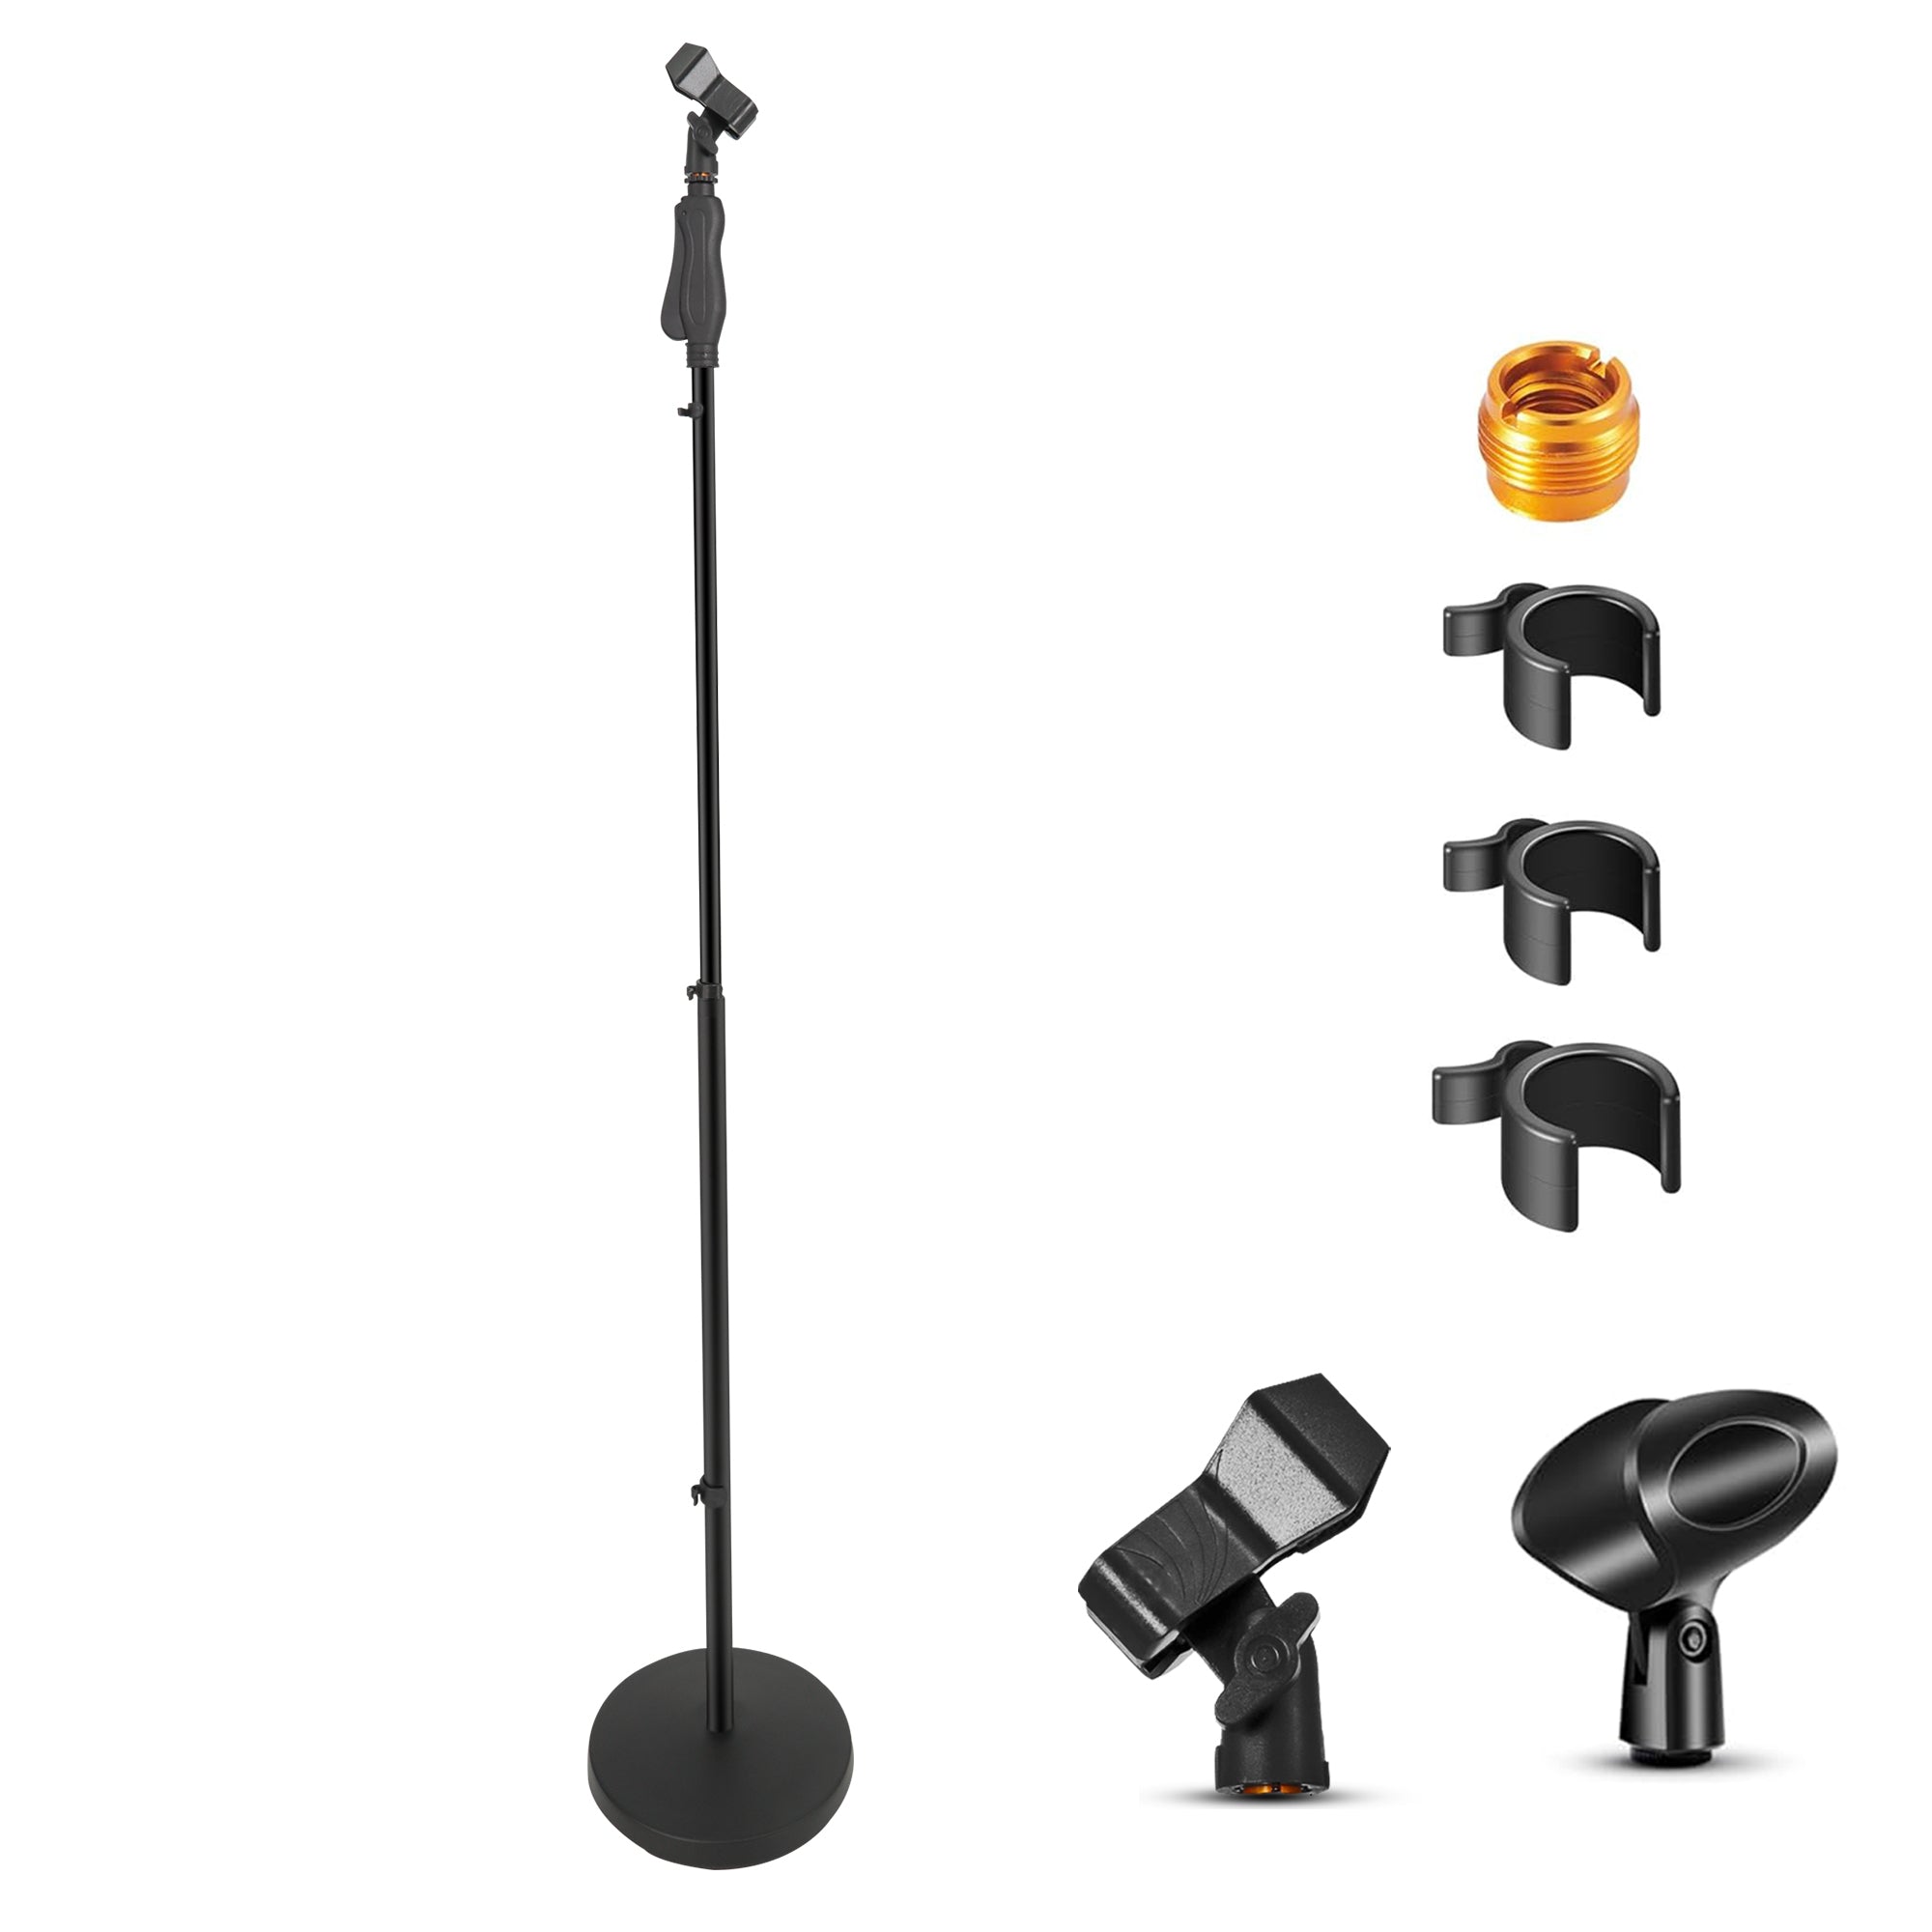 Height-adjustable universal microphone stand with a round base for stability.